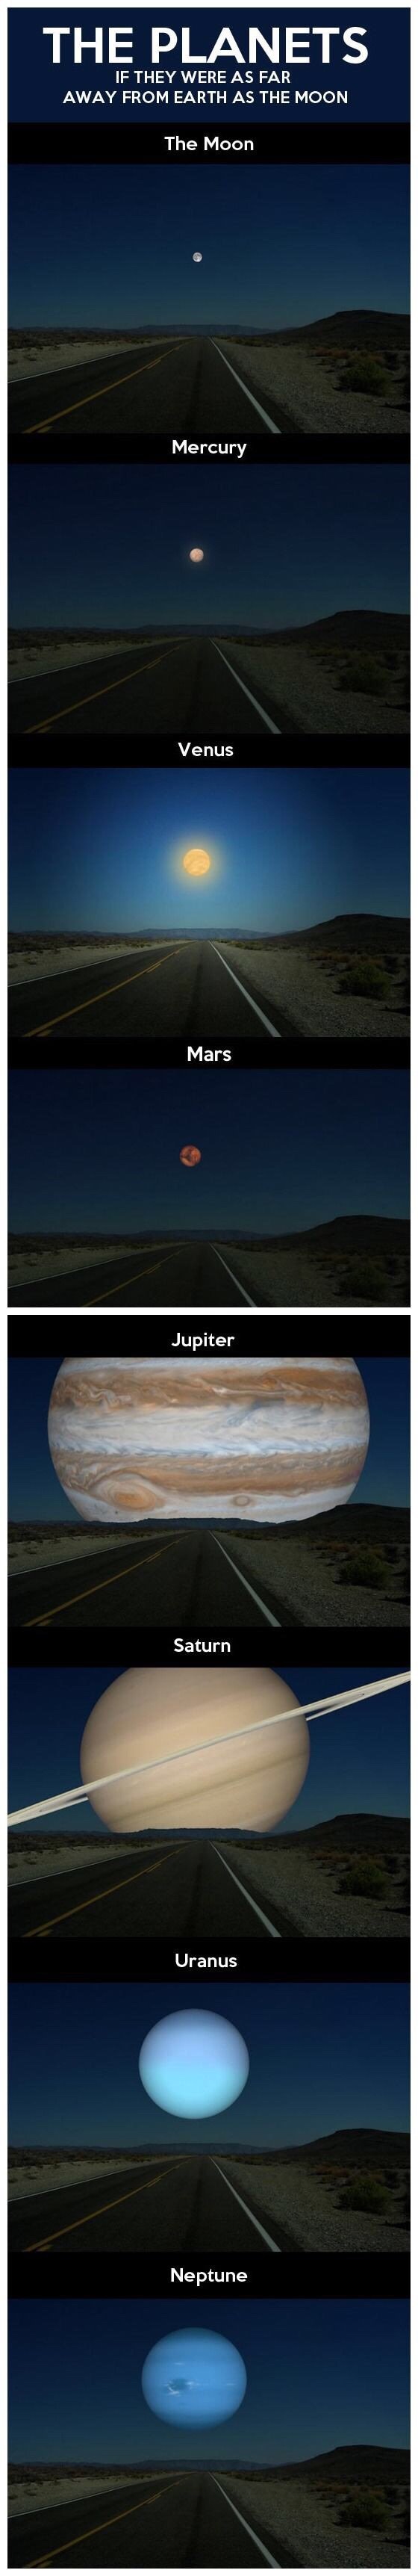 If planets were as close as our moon